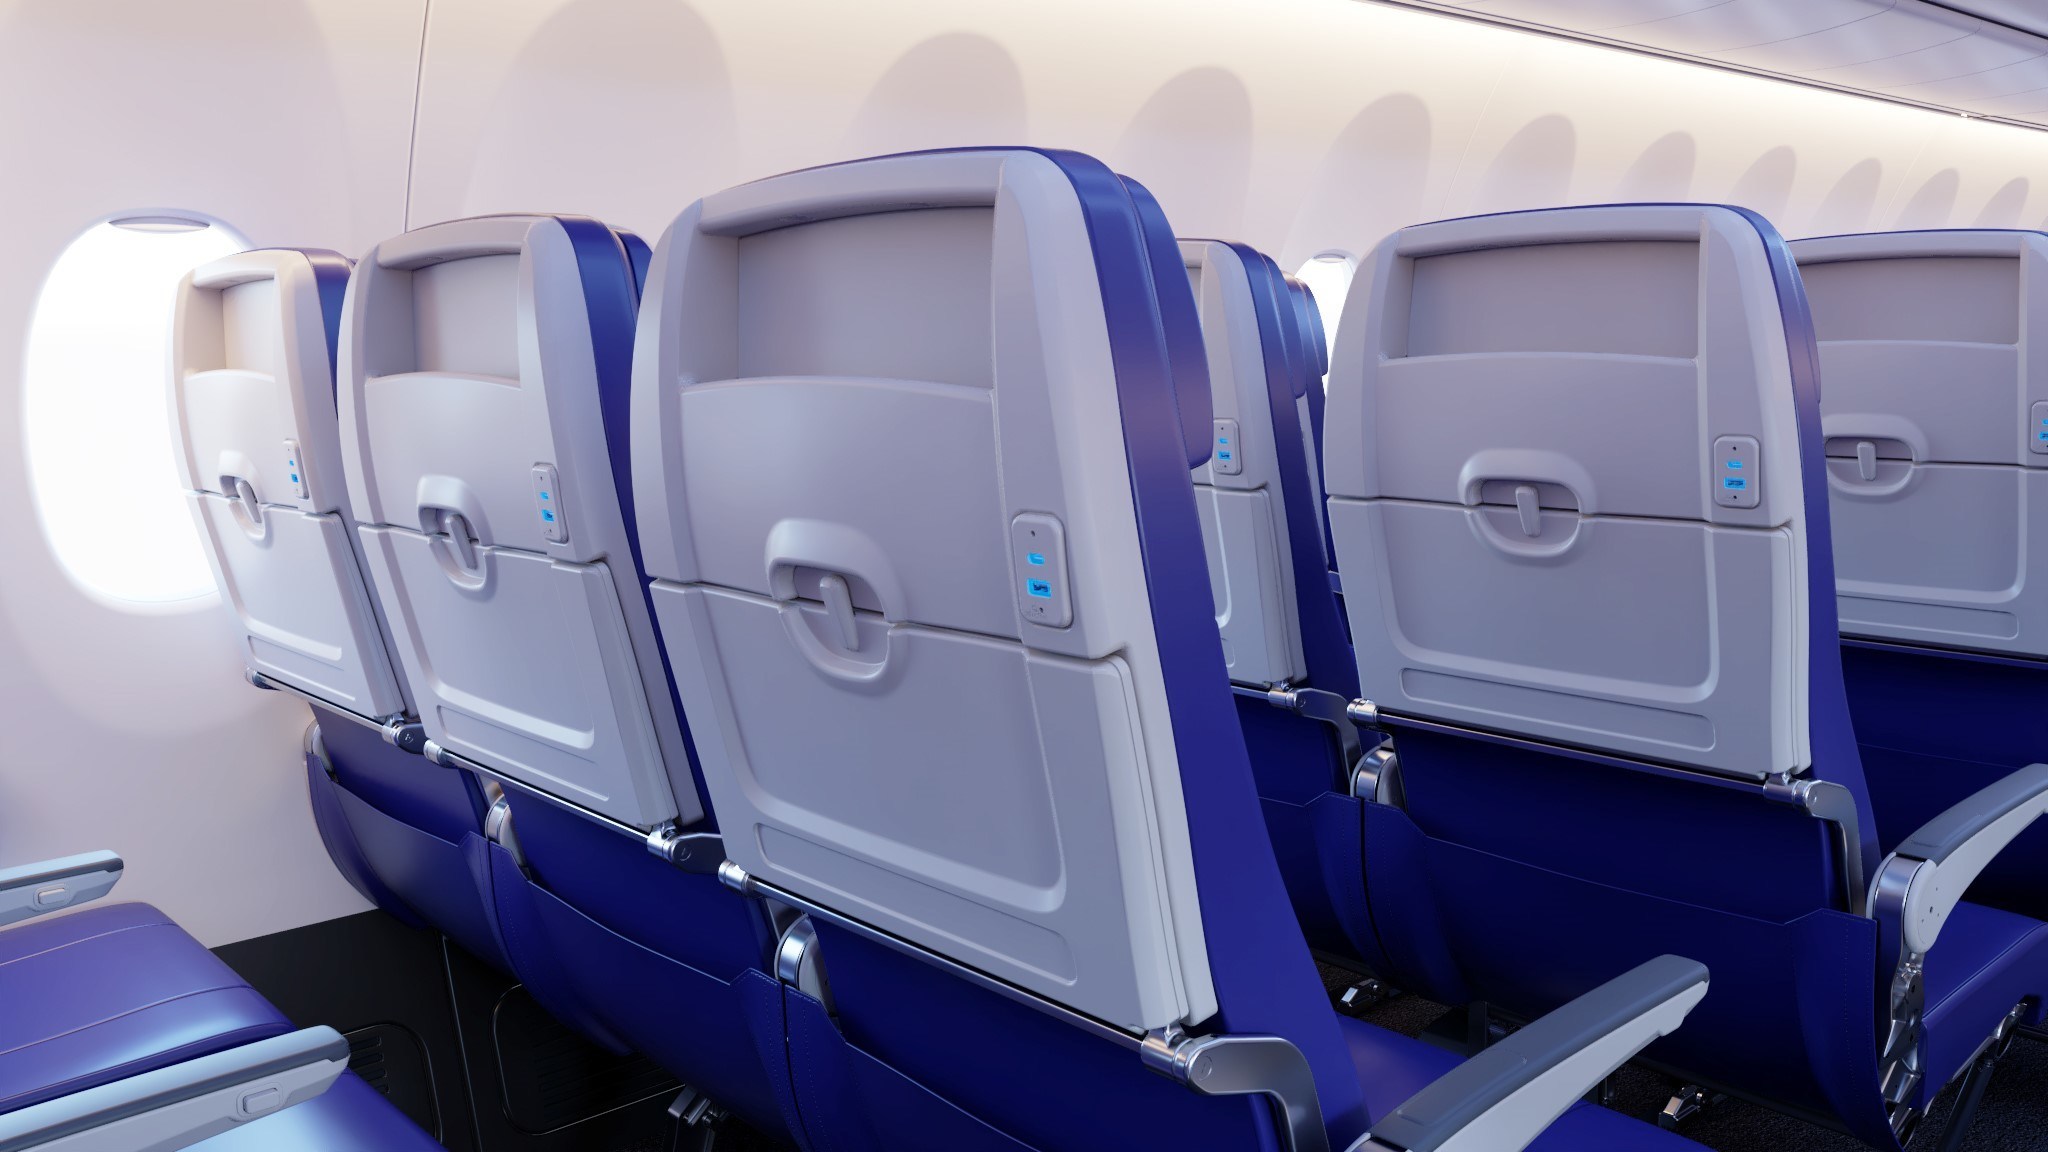 Southwest Adds New Perks